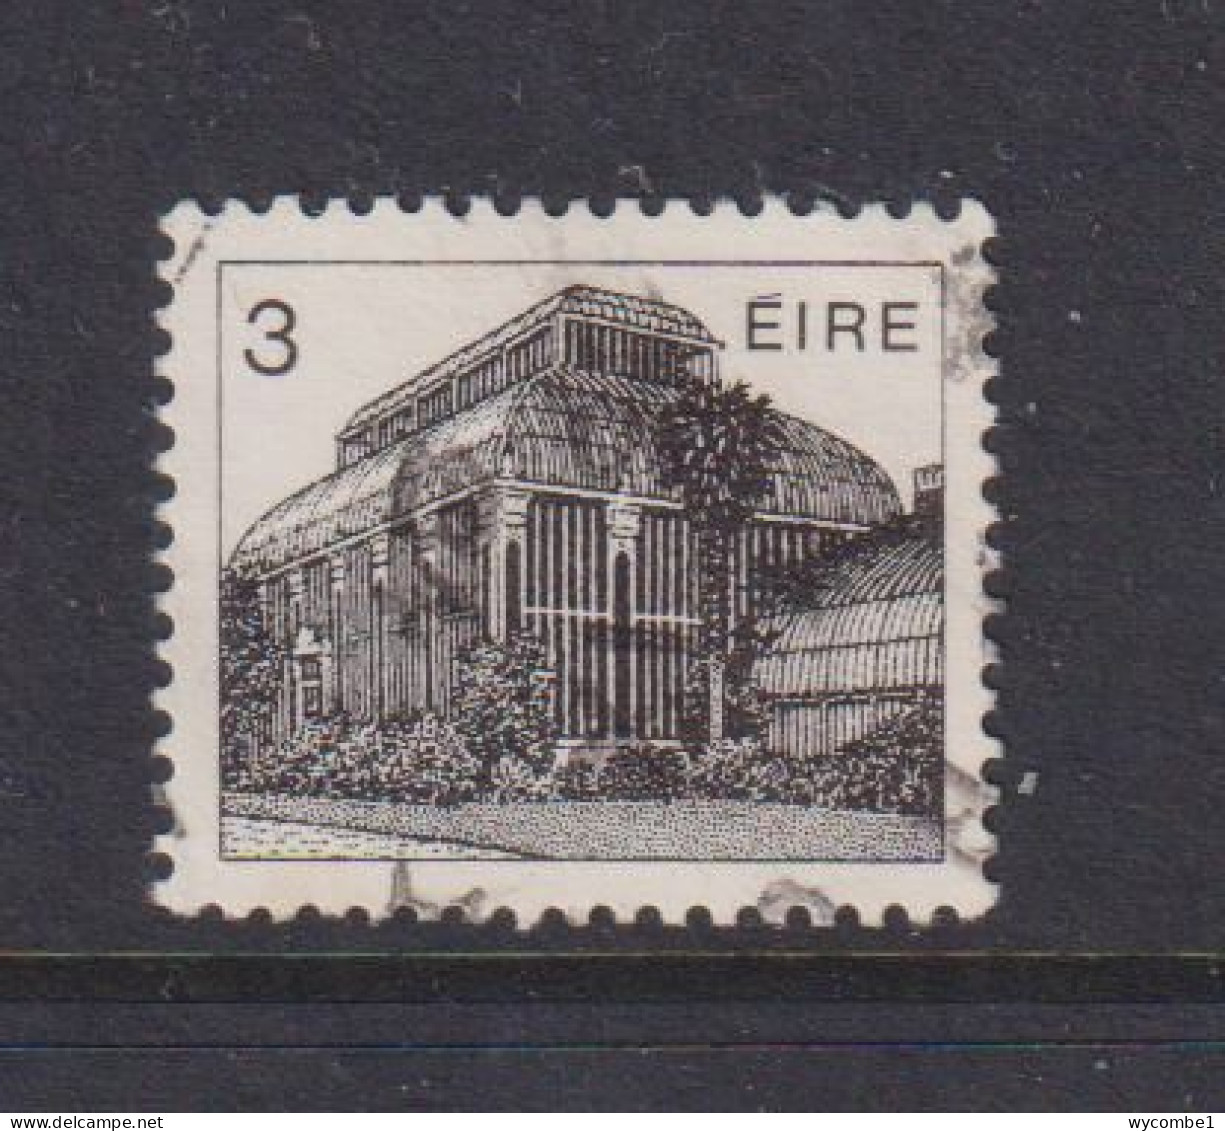 IRELAND - 1983  Architecture Definitives  3p  Used As Scan - Used Stamps